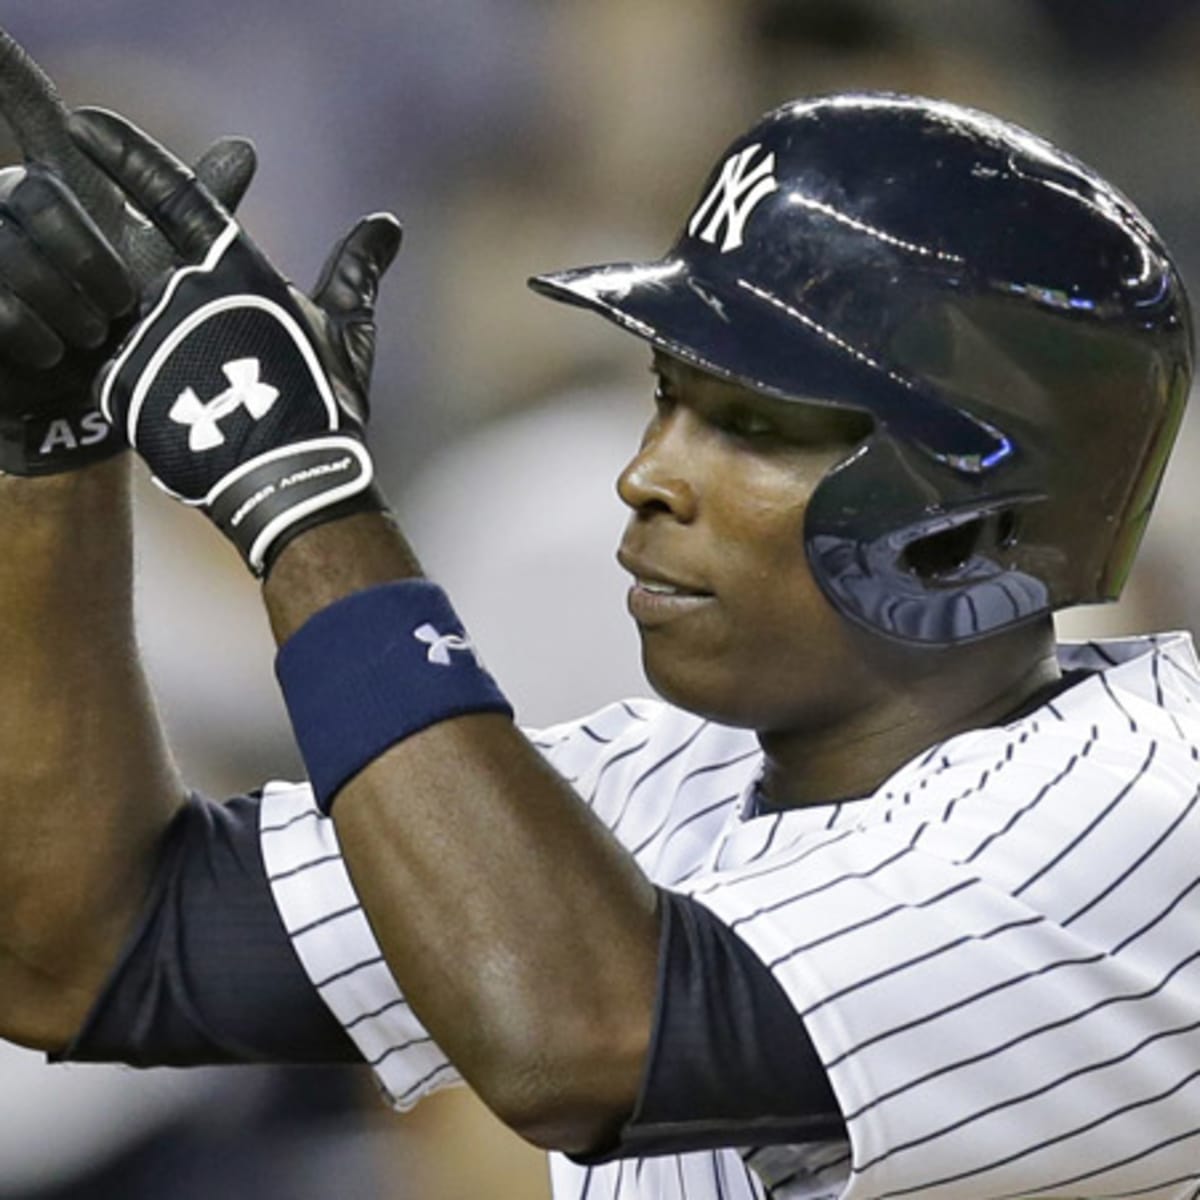 Robinson Cano homers twice in Yankees' win over Blue Jays